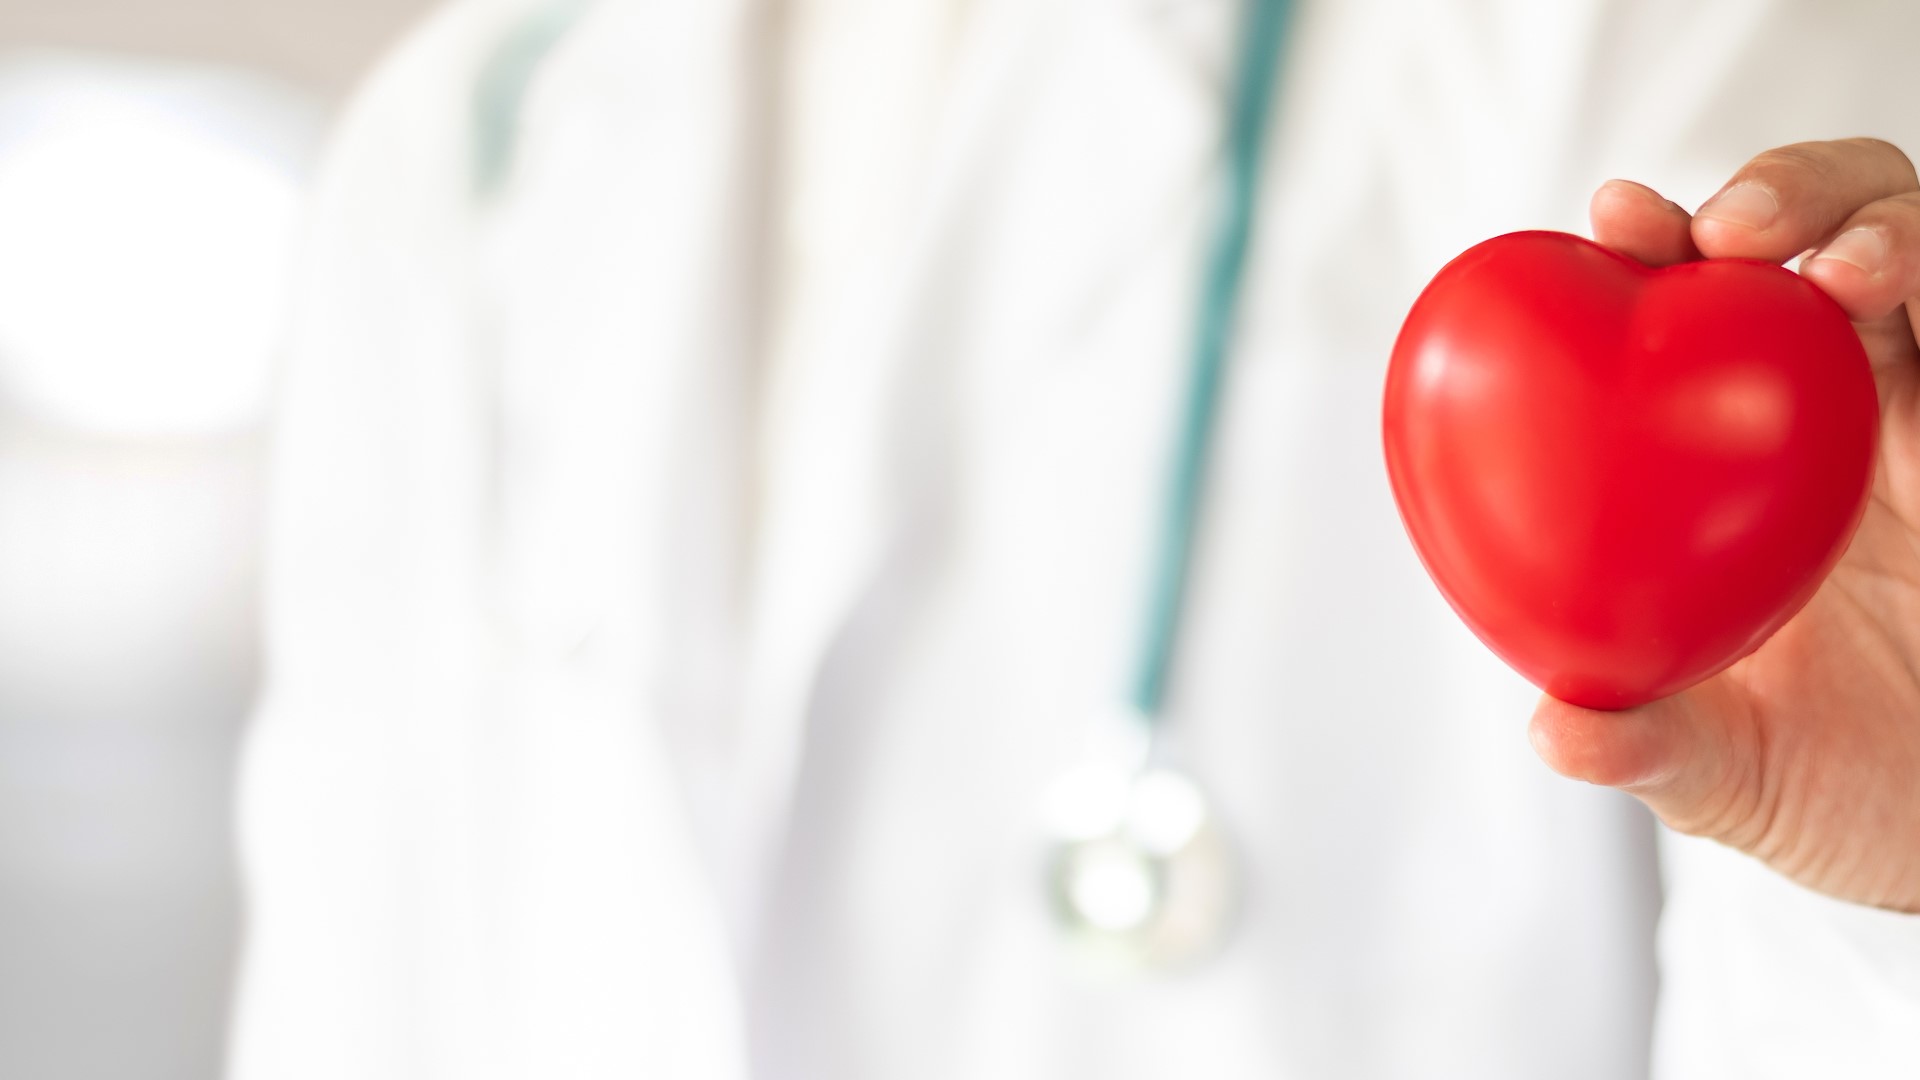 Cone Health cardiologist Dr. Christopher Schumann answers your questions about preventing heart health problems and lowering your risk factors.